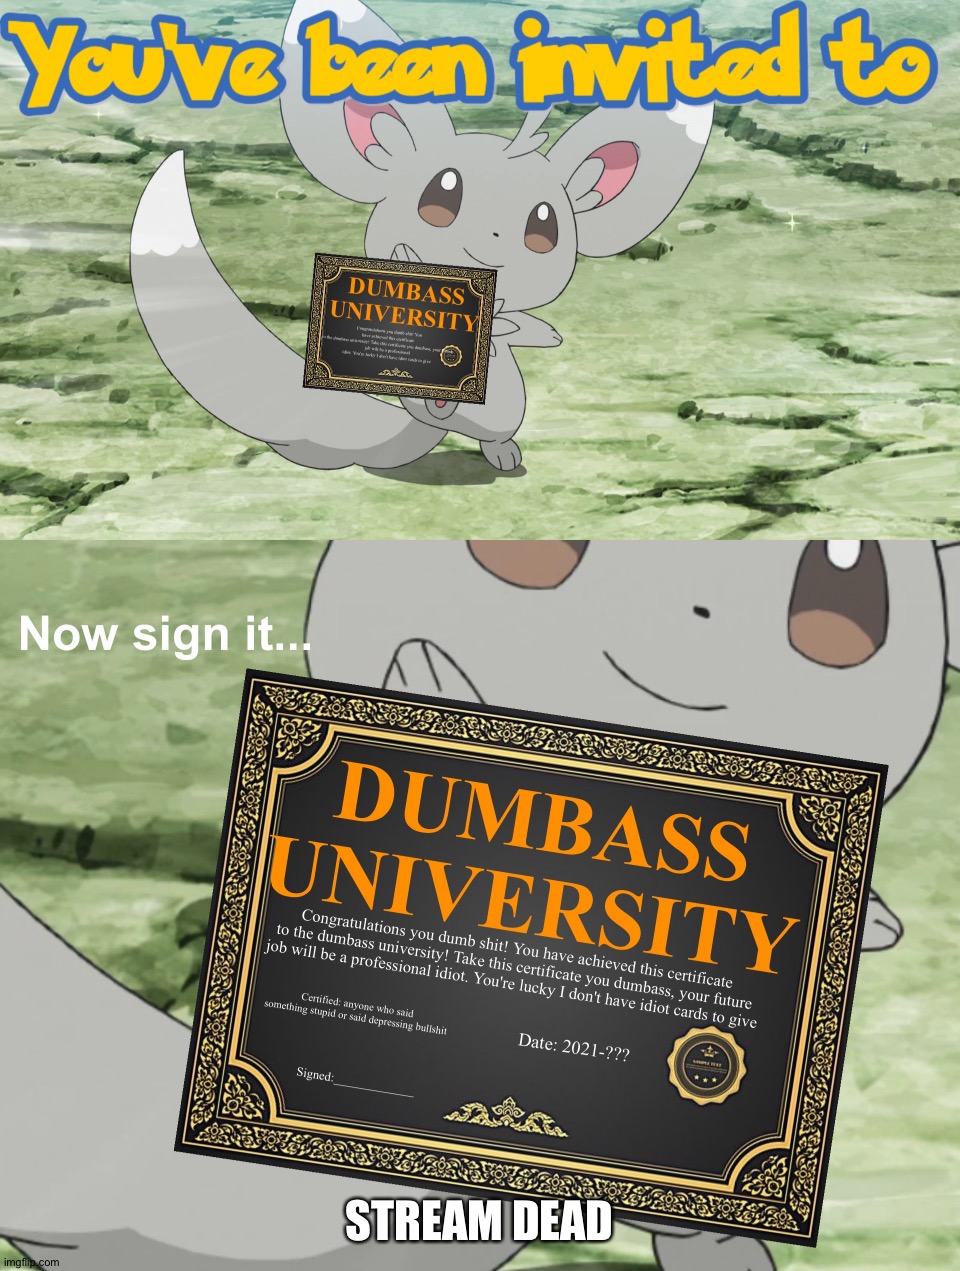 Gm? | STREAM DEAD | image tagged in you've been invited to dumbass university | made w/ Imgflip meme maker